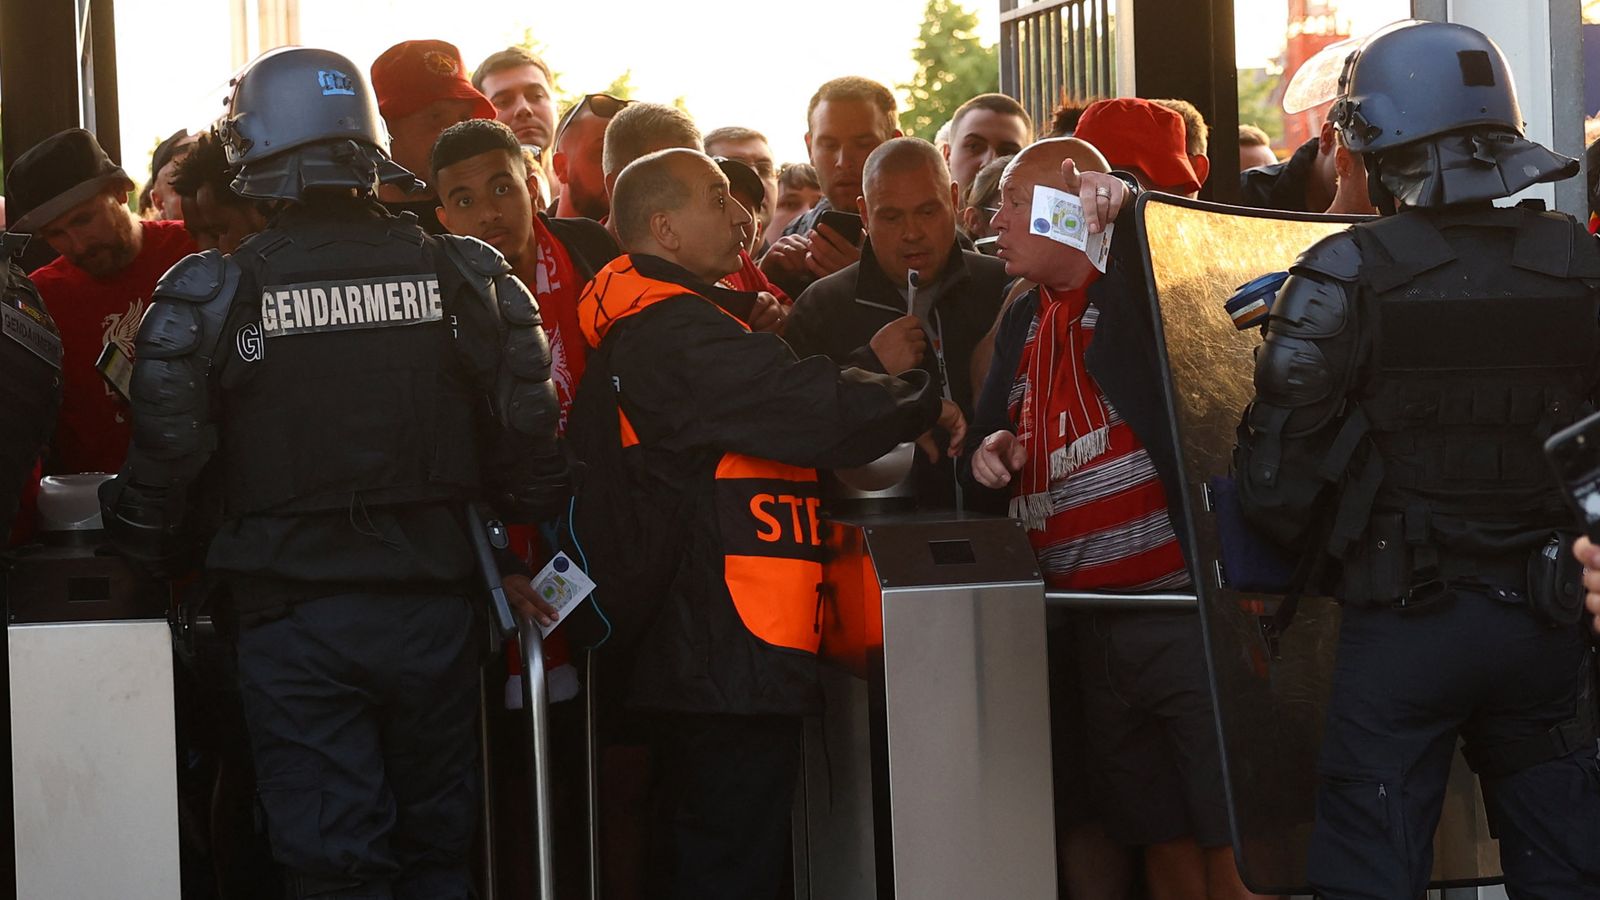 Champions League final: French police were heavy-handed with absolutely zero tolerance, says Sky Sports News chief reporter